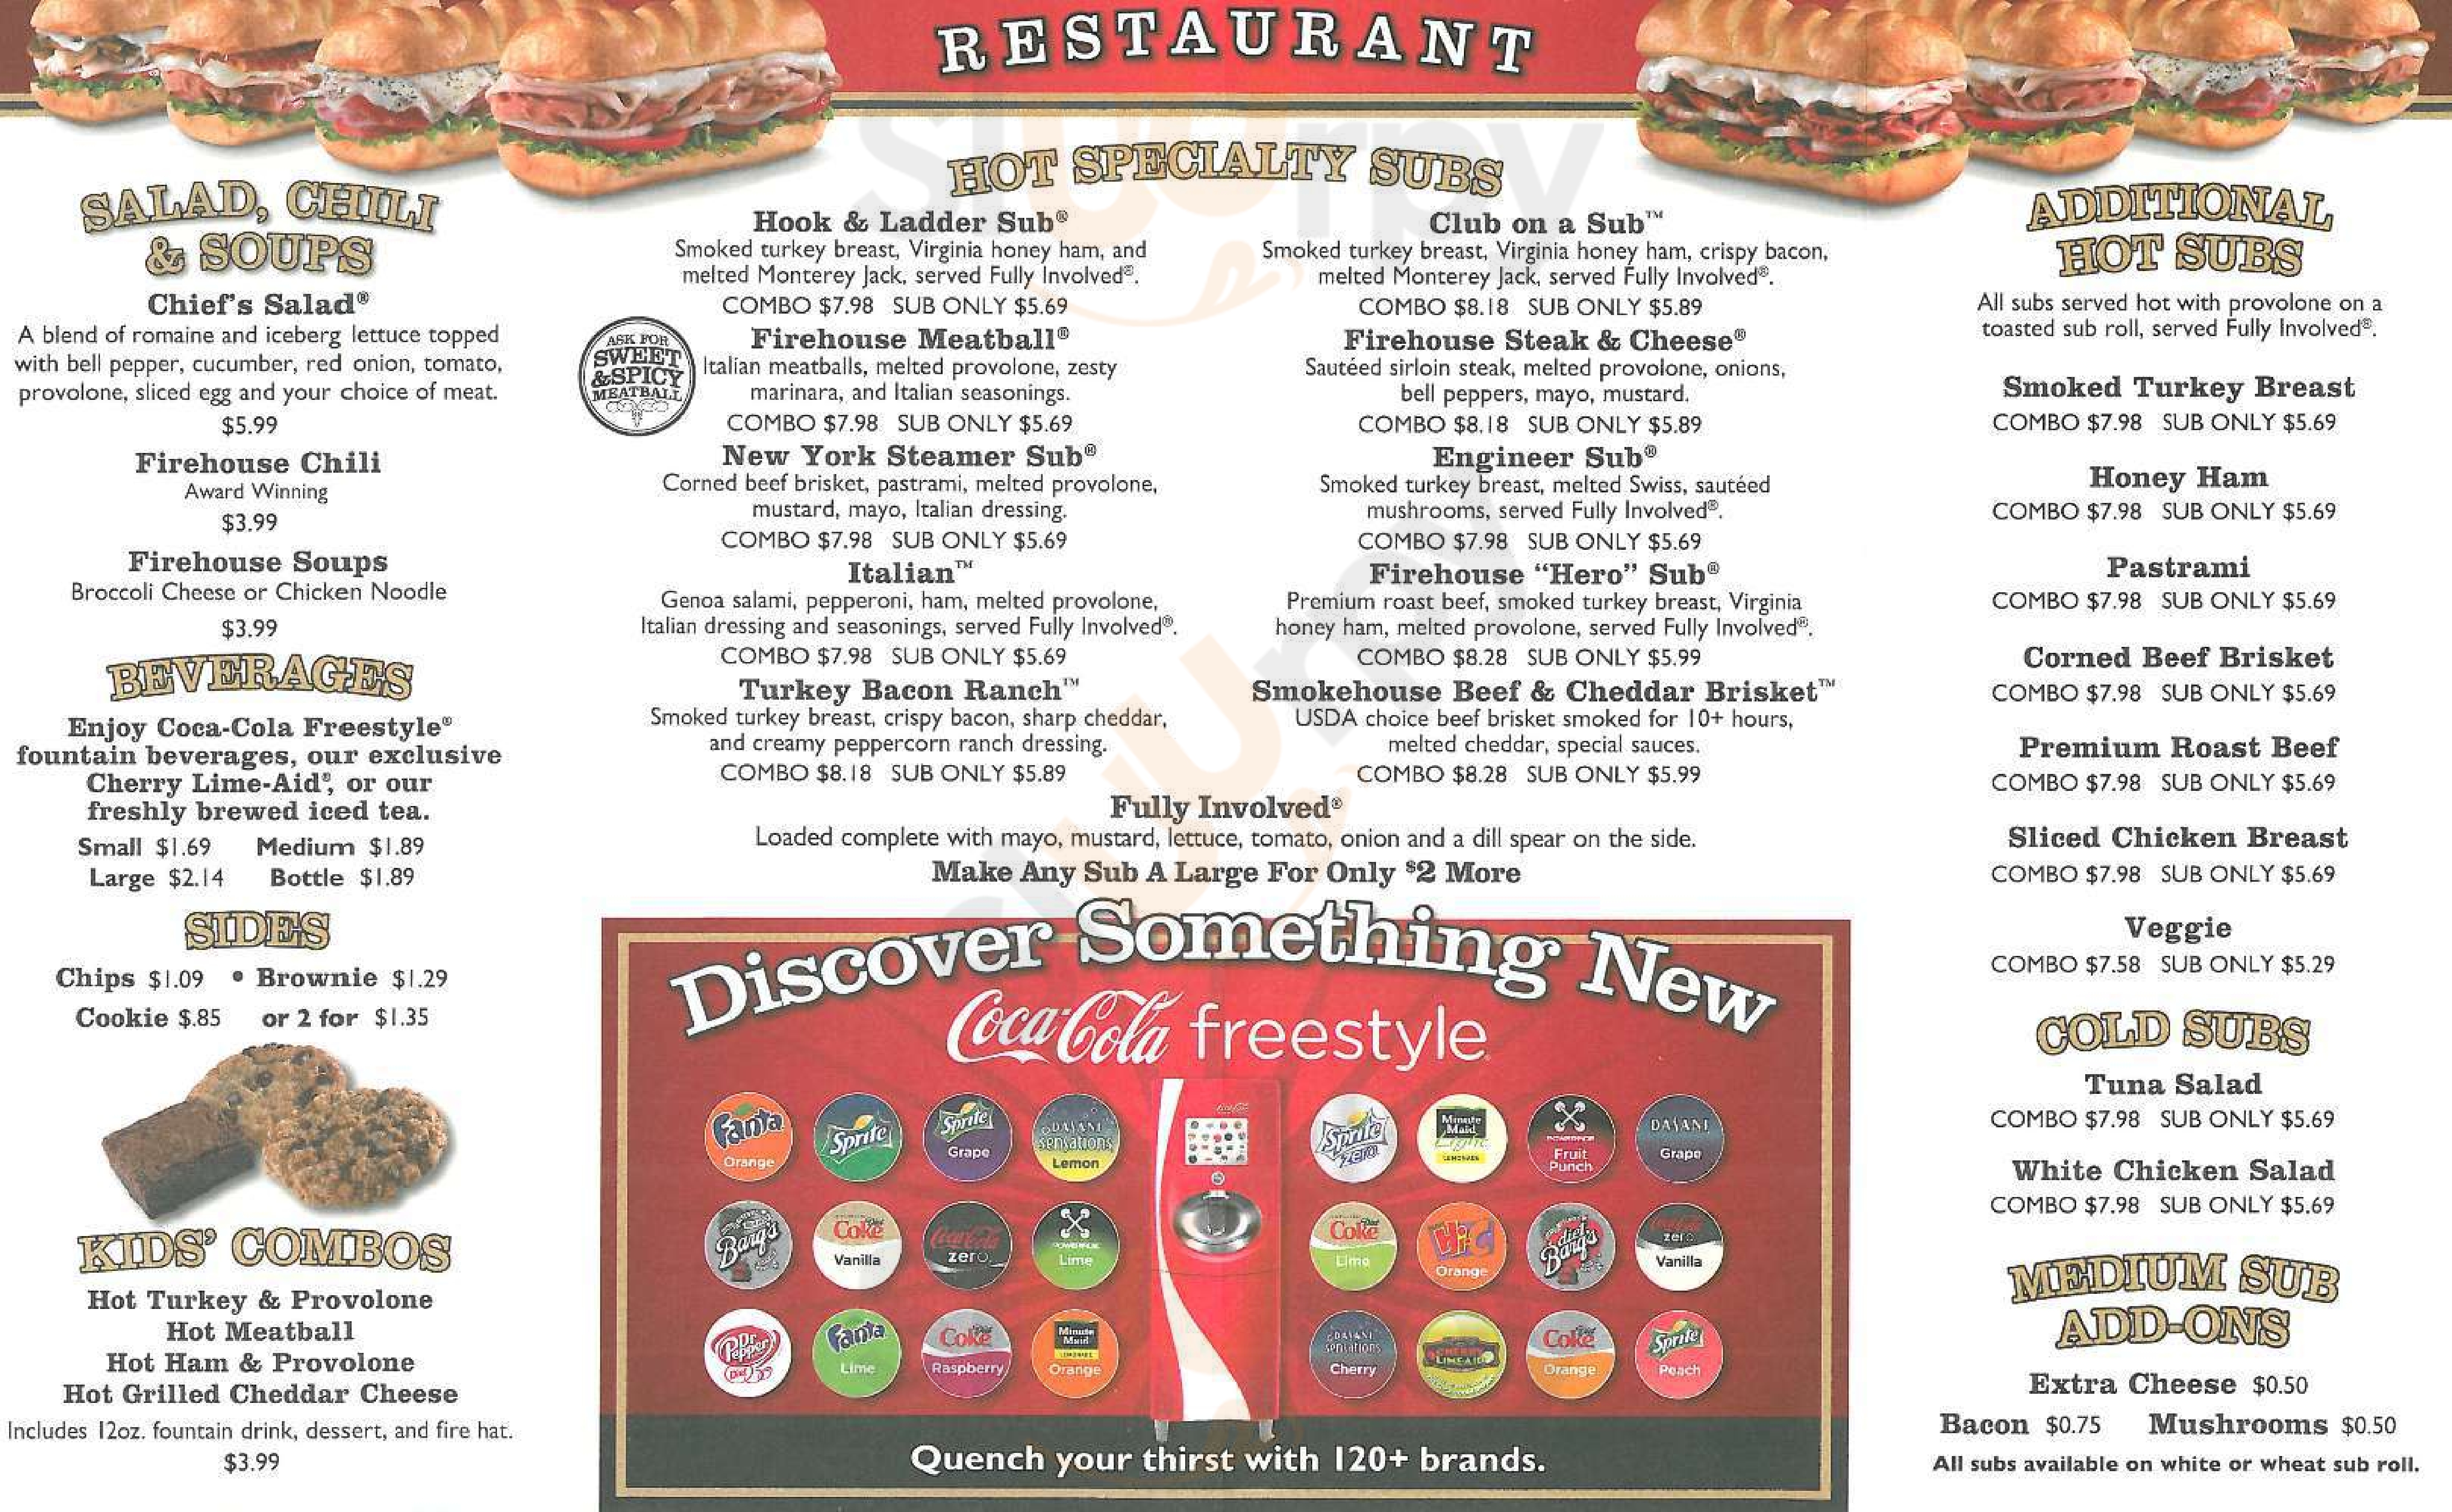 Firehouse Subs Searcy Menu - 1